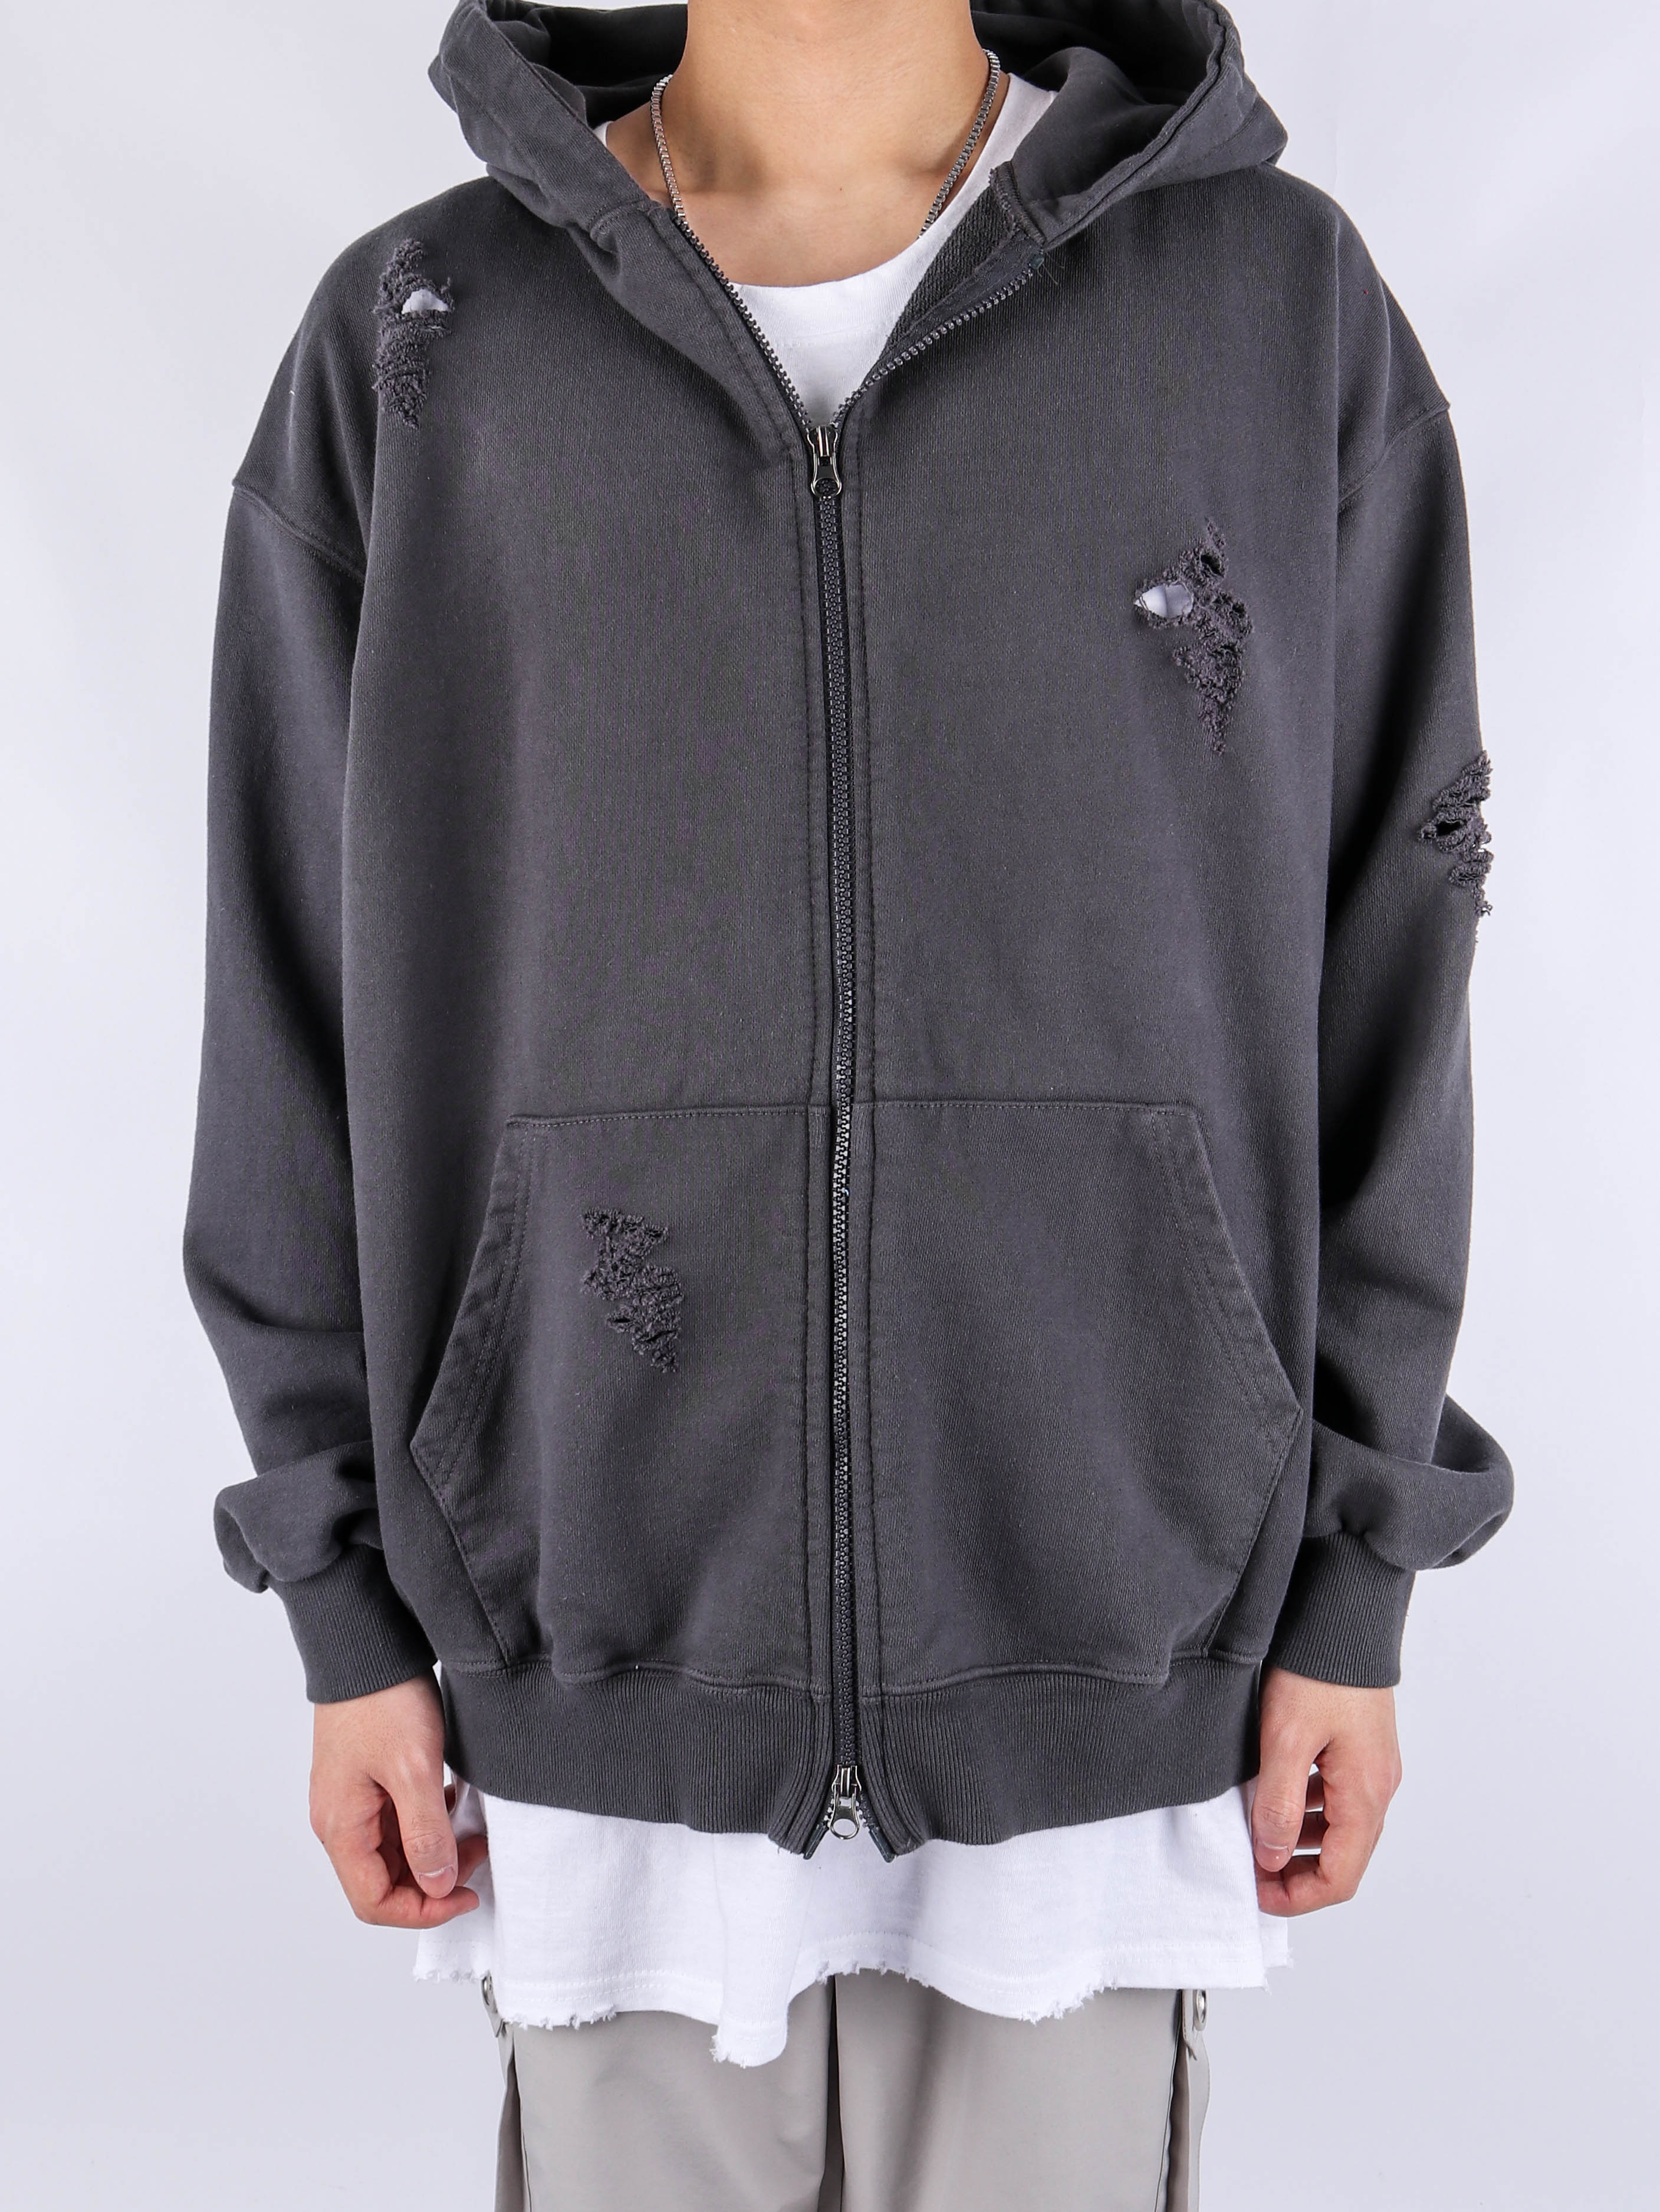 justyoung-RO Scratch Hood Zip-Up (2color)♡韓國男裝外套